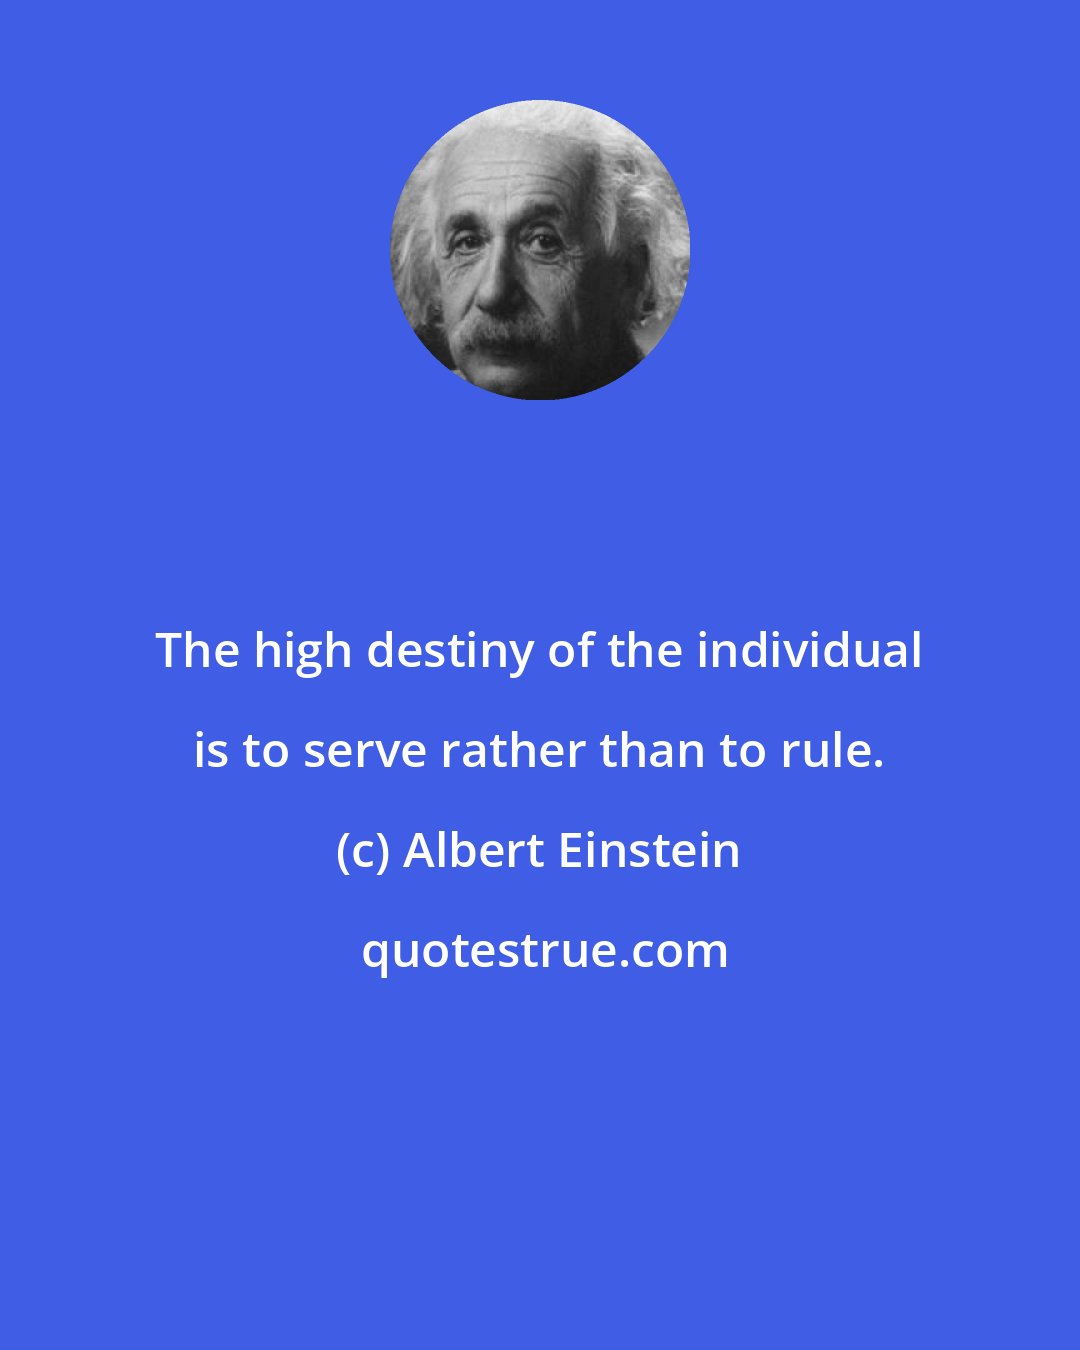 Albert Einstein: The high destiny of the individual is to serve rather than to rule.